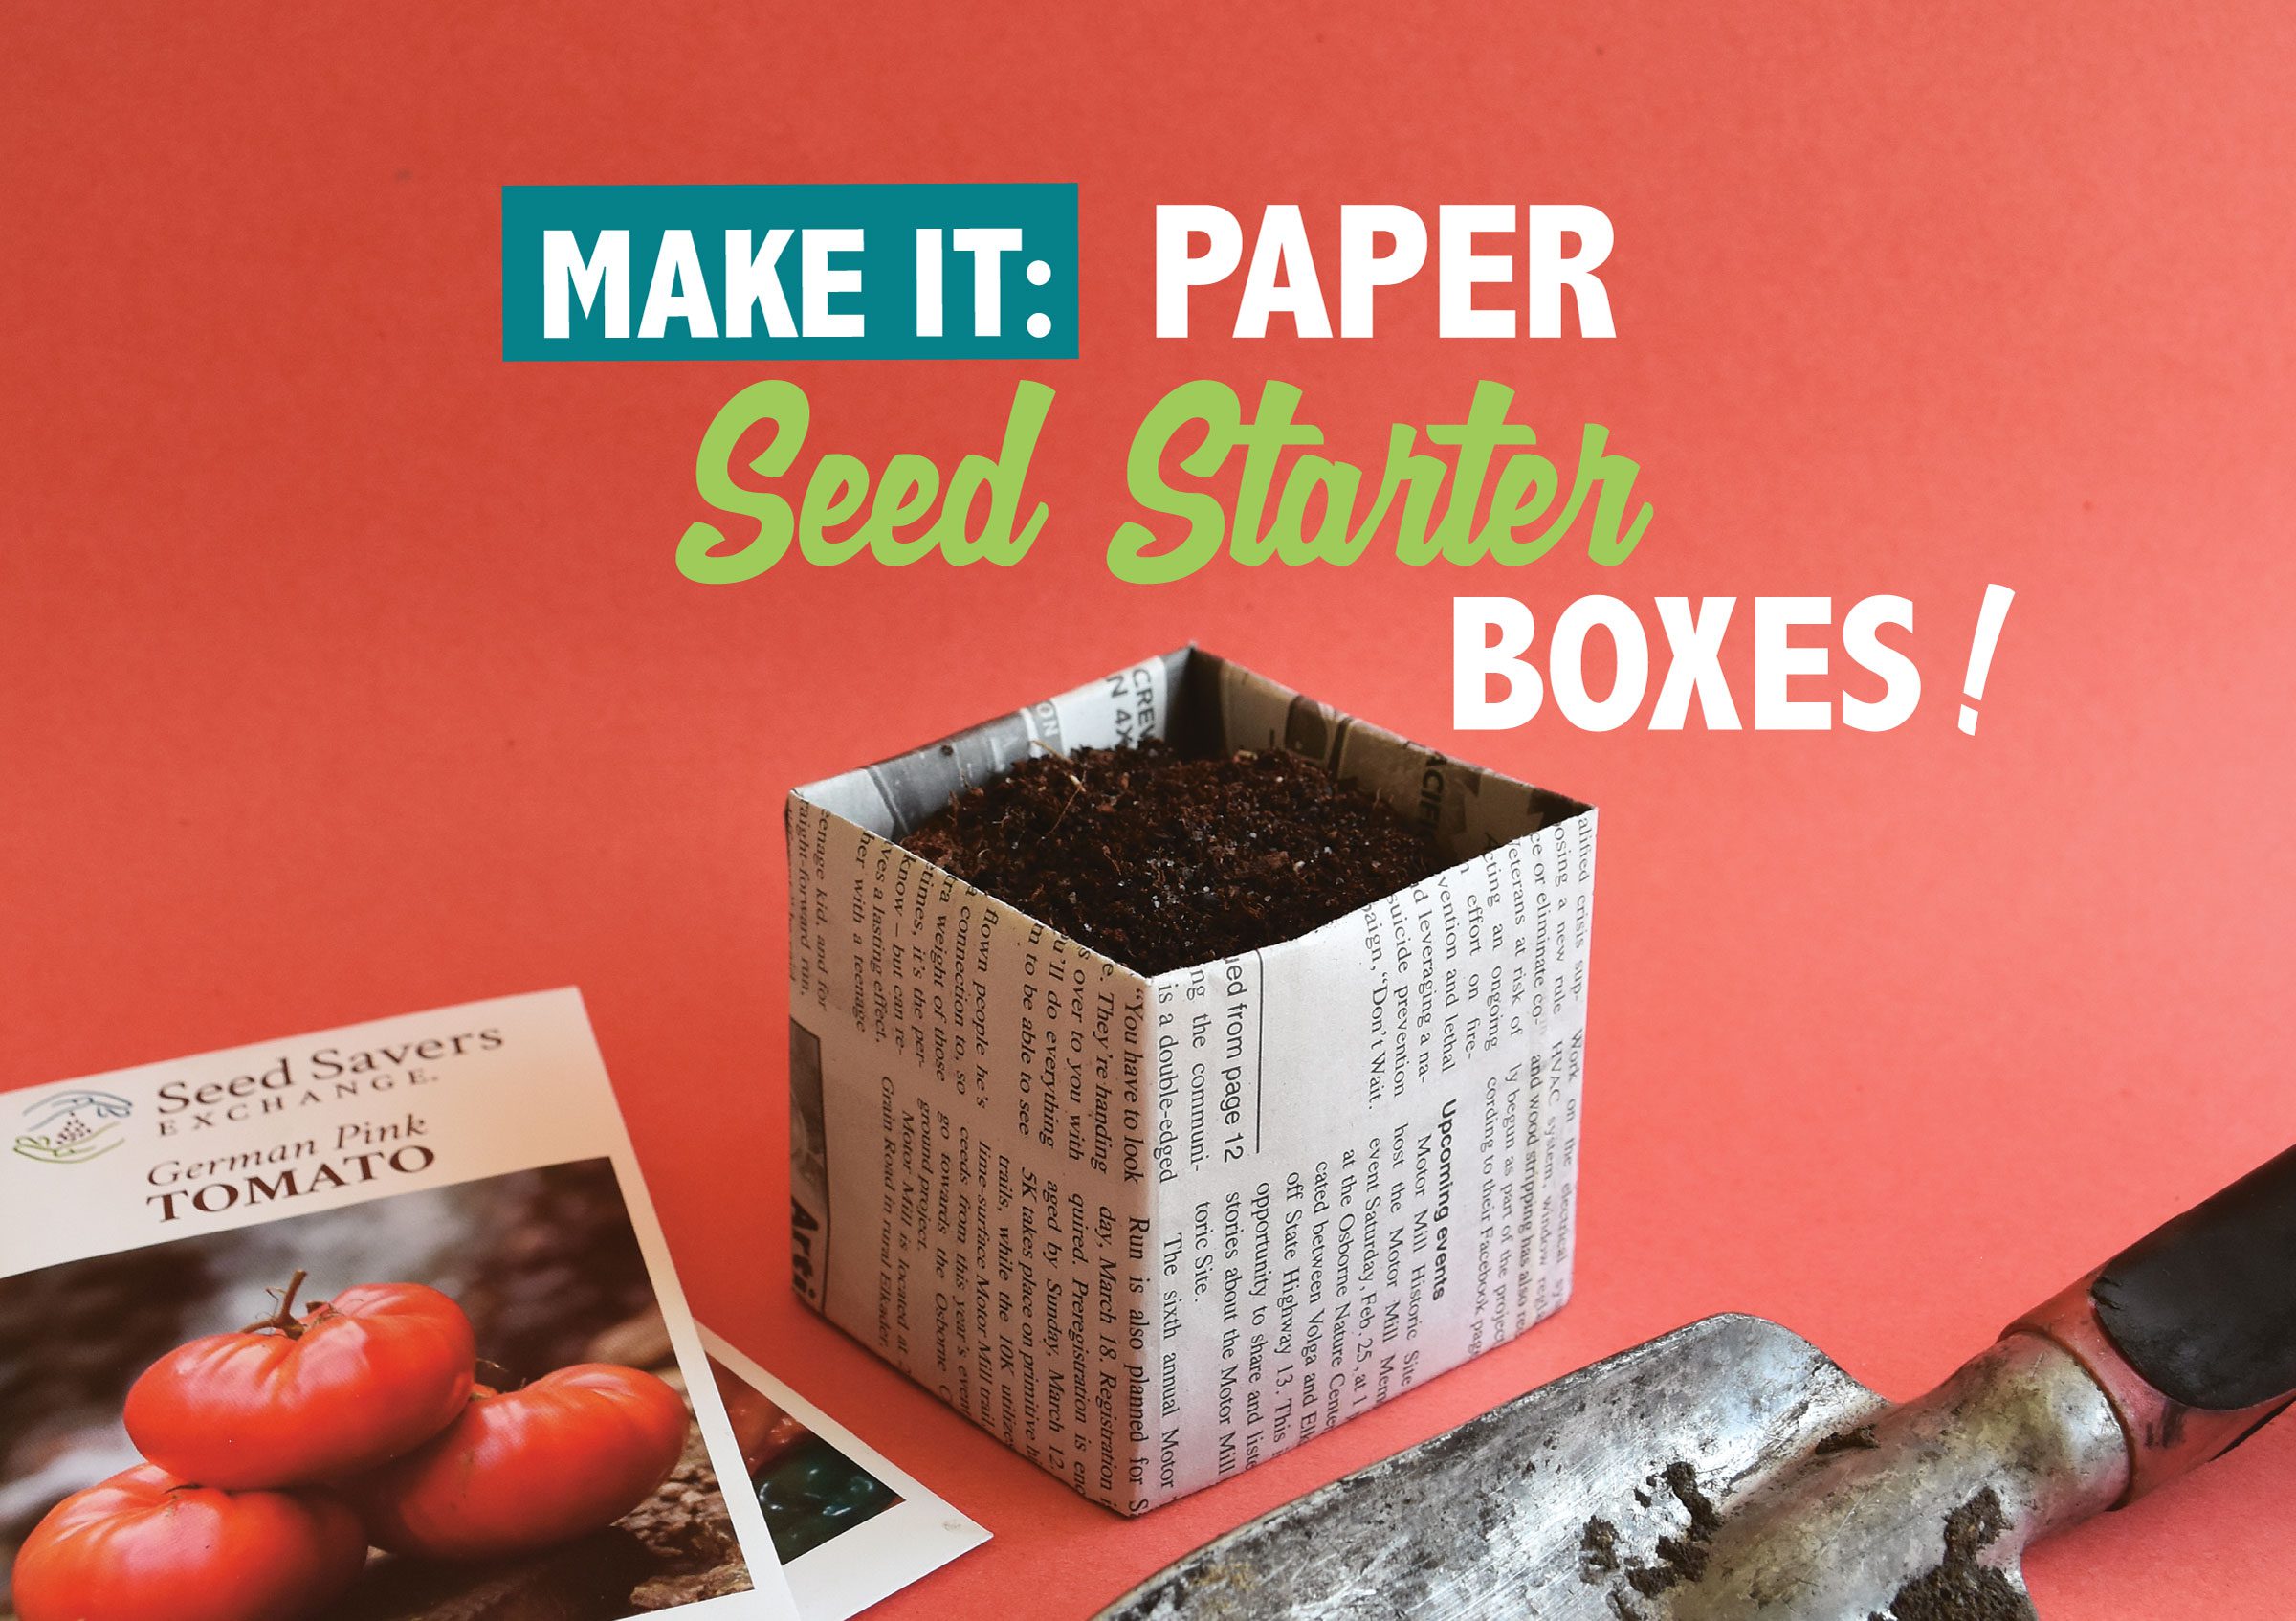 Make It: Paper Seed Starter Boxes!